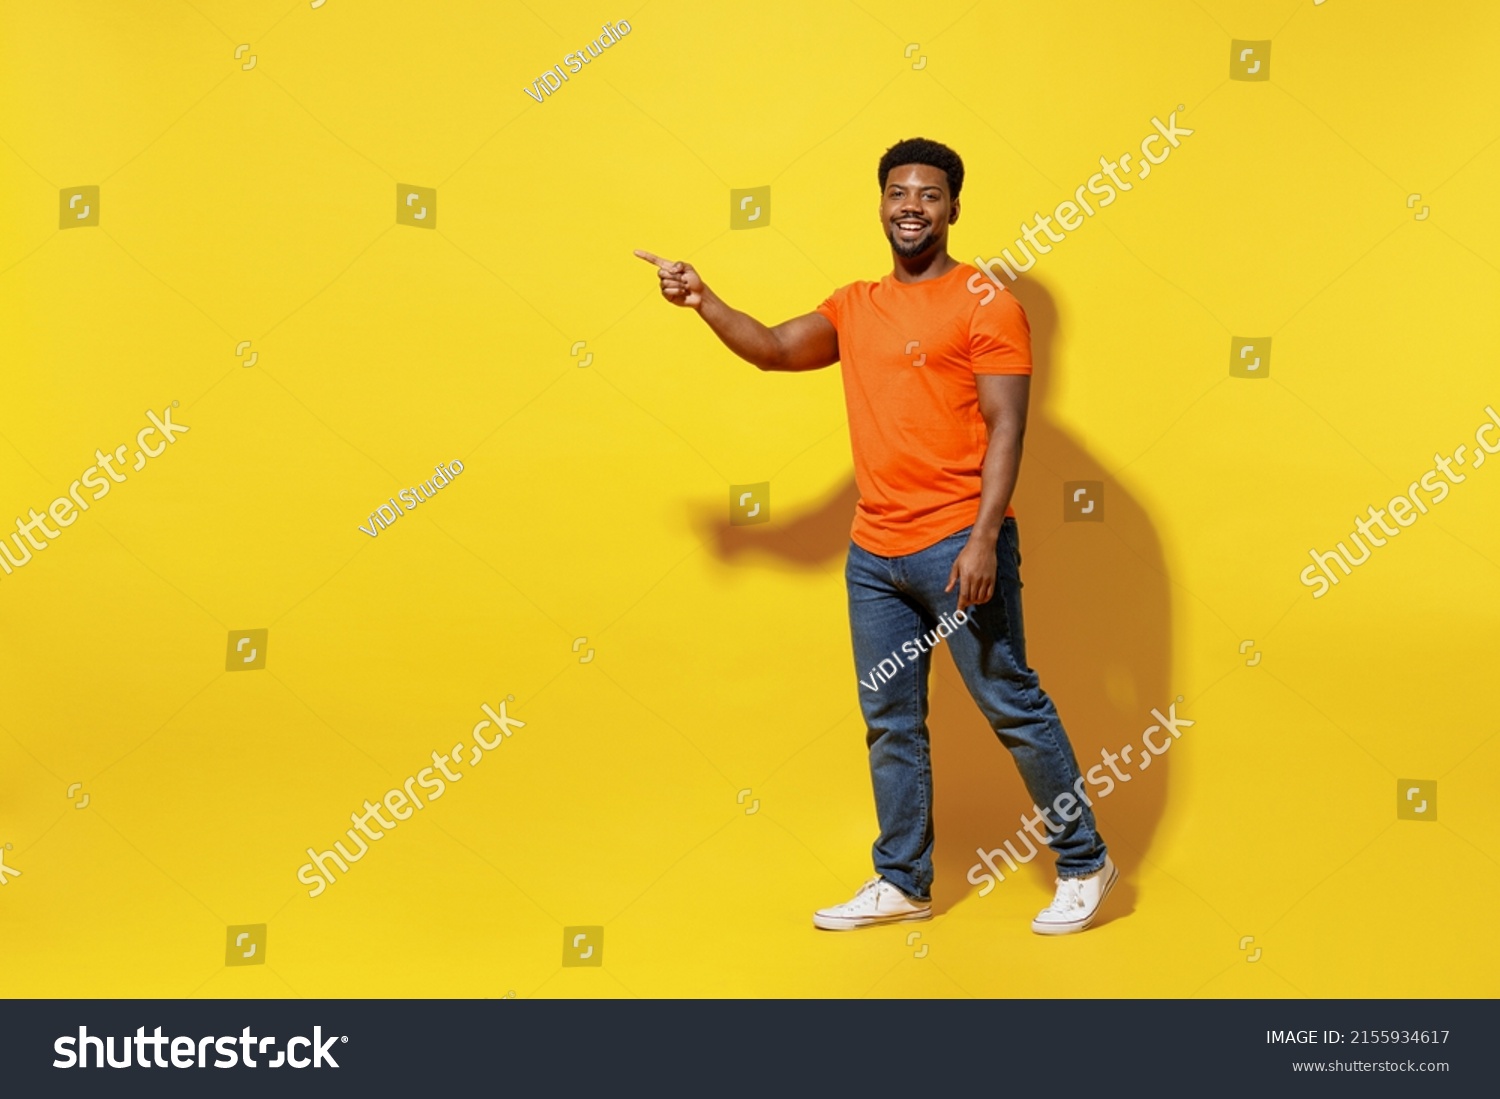 Full Body Side View Smiling Young Stock Photo 2155934617 | Shutterstock